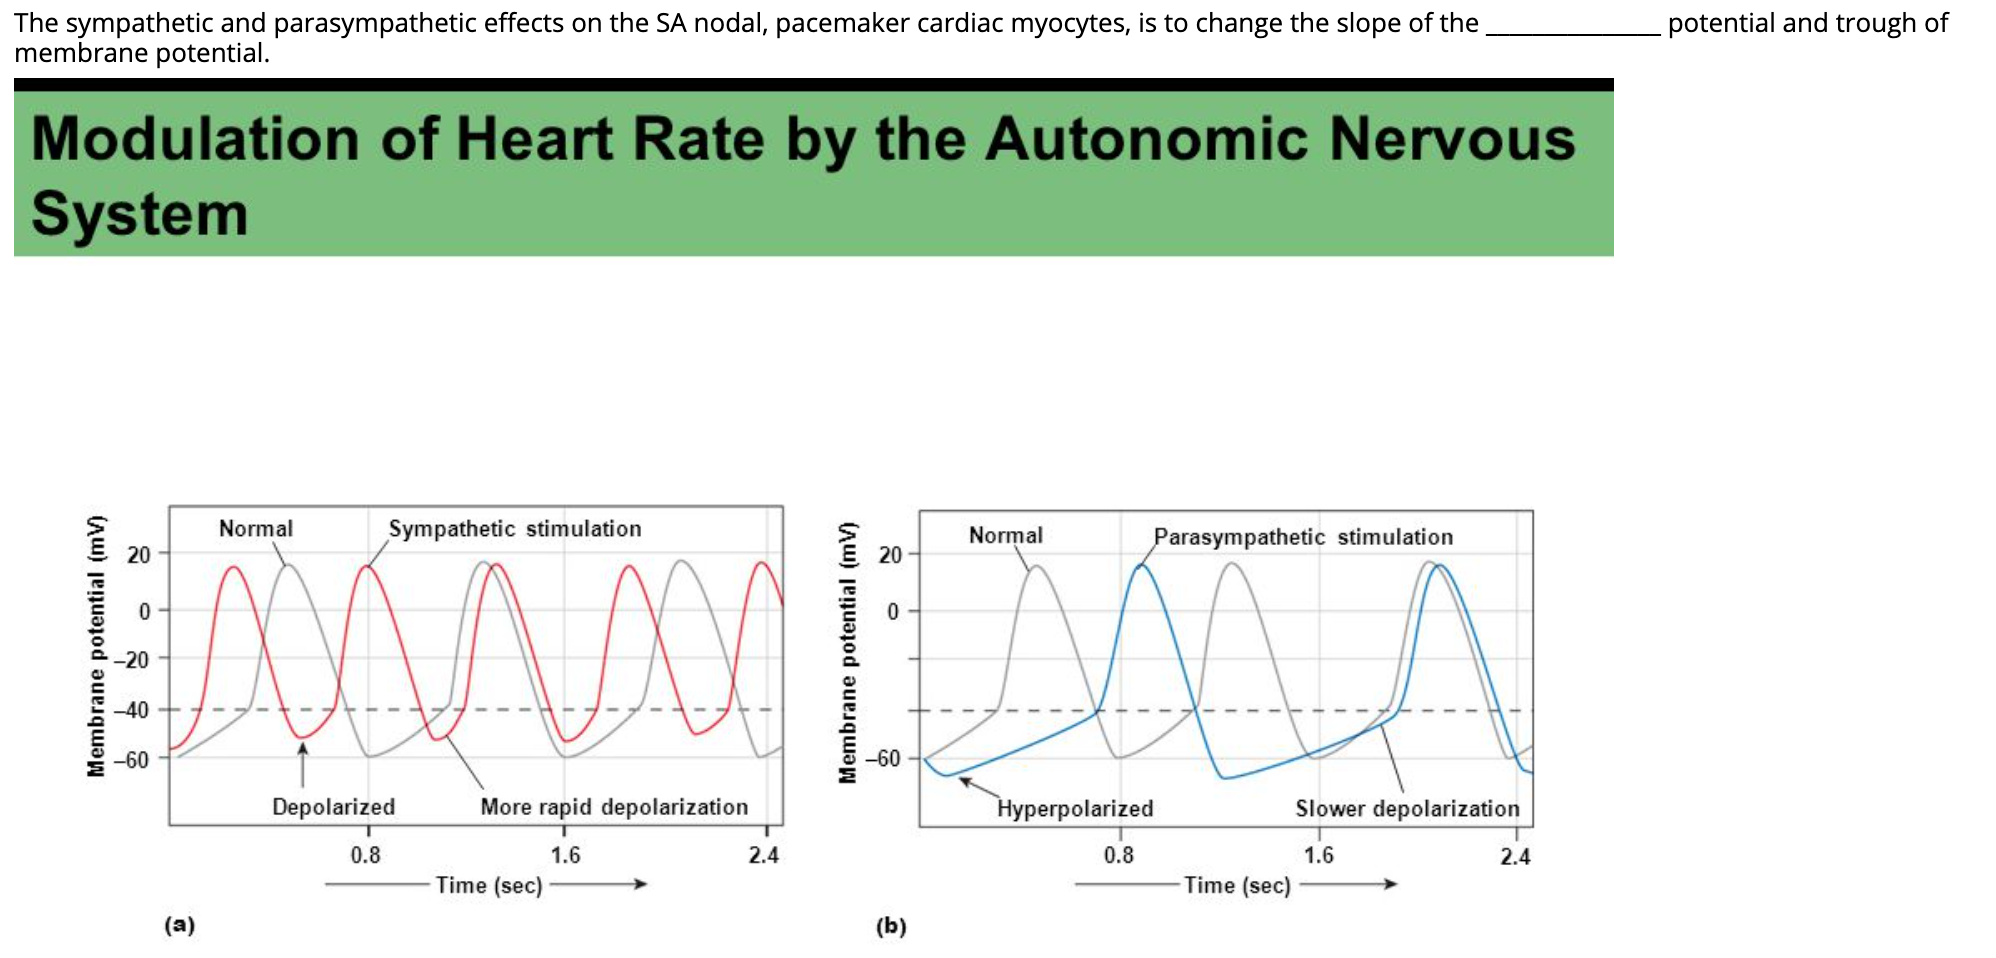 The sympathetic and parasympathetic effects on the SA nodal, pacemaker cardiac myocytes, is to change the slope of the membra